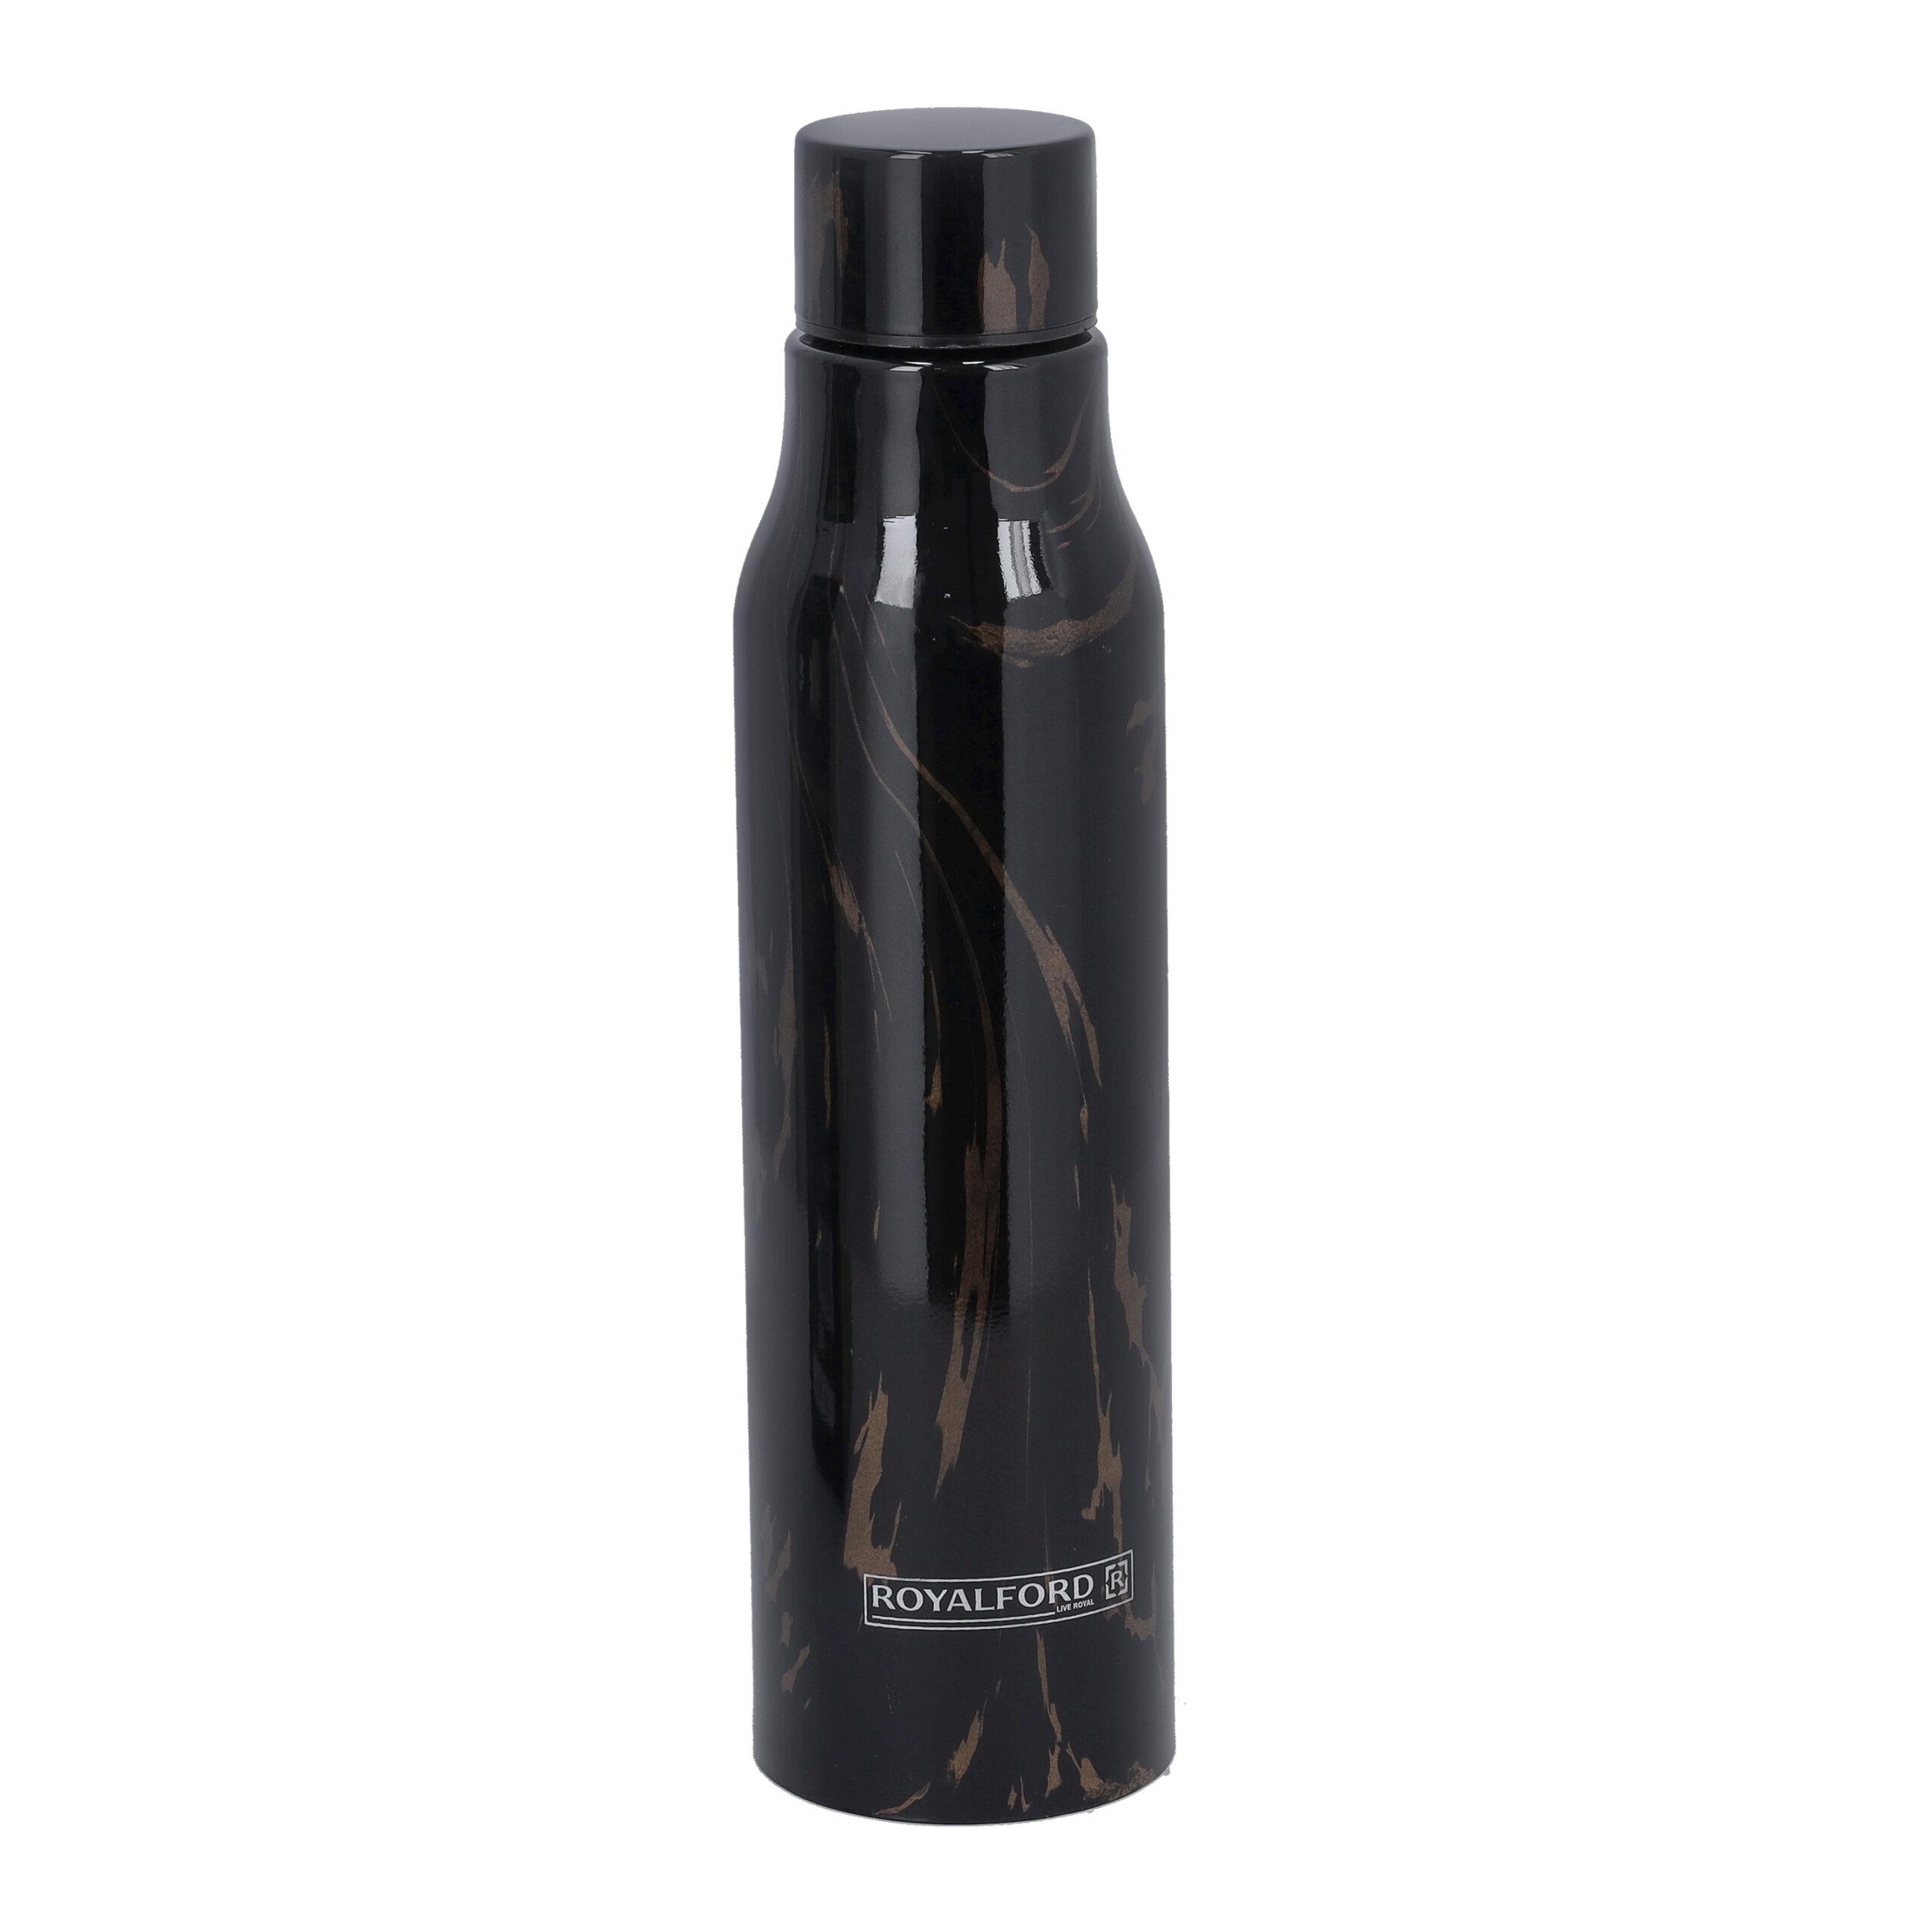 Royalford Stainless Steel Water Bottle, Silicon Sealing Ring | RF10019 | BPA Free | Odour Free | 1000 ml | Durable Body | Ideal for Hiking, Camping, Office and School Purpose